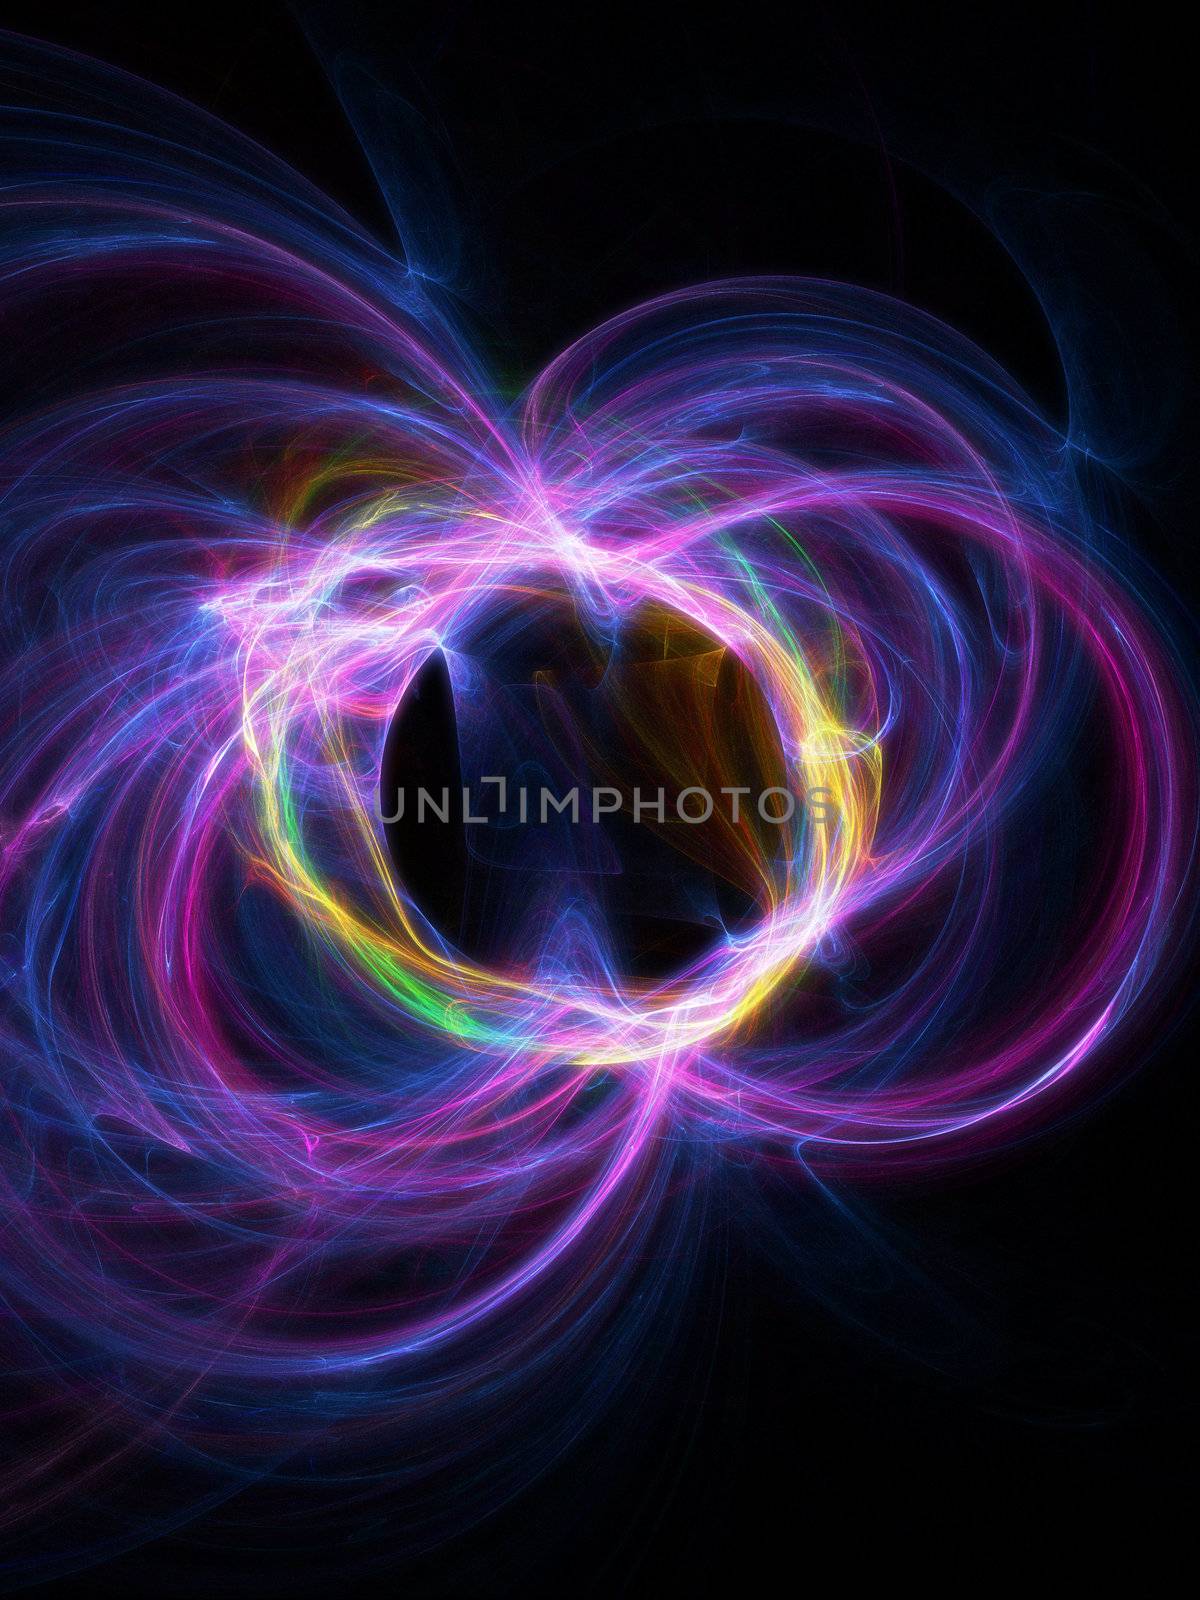 Abstract light composition on black background.
Magnetic force concept